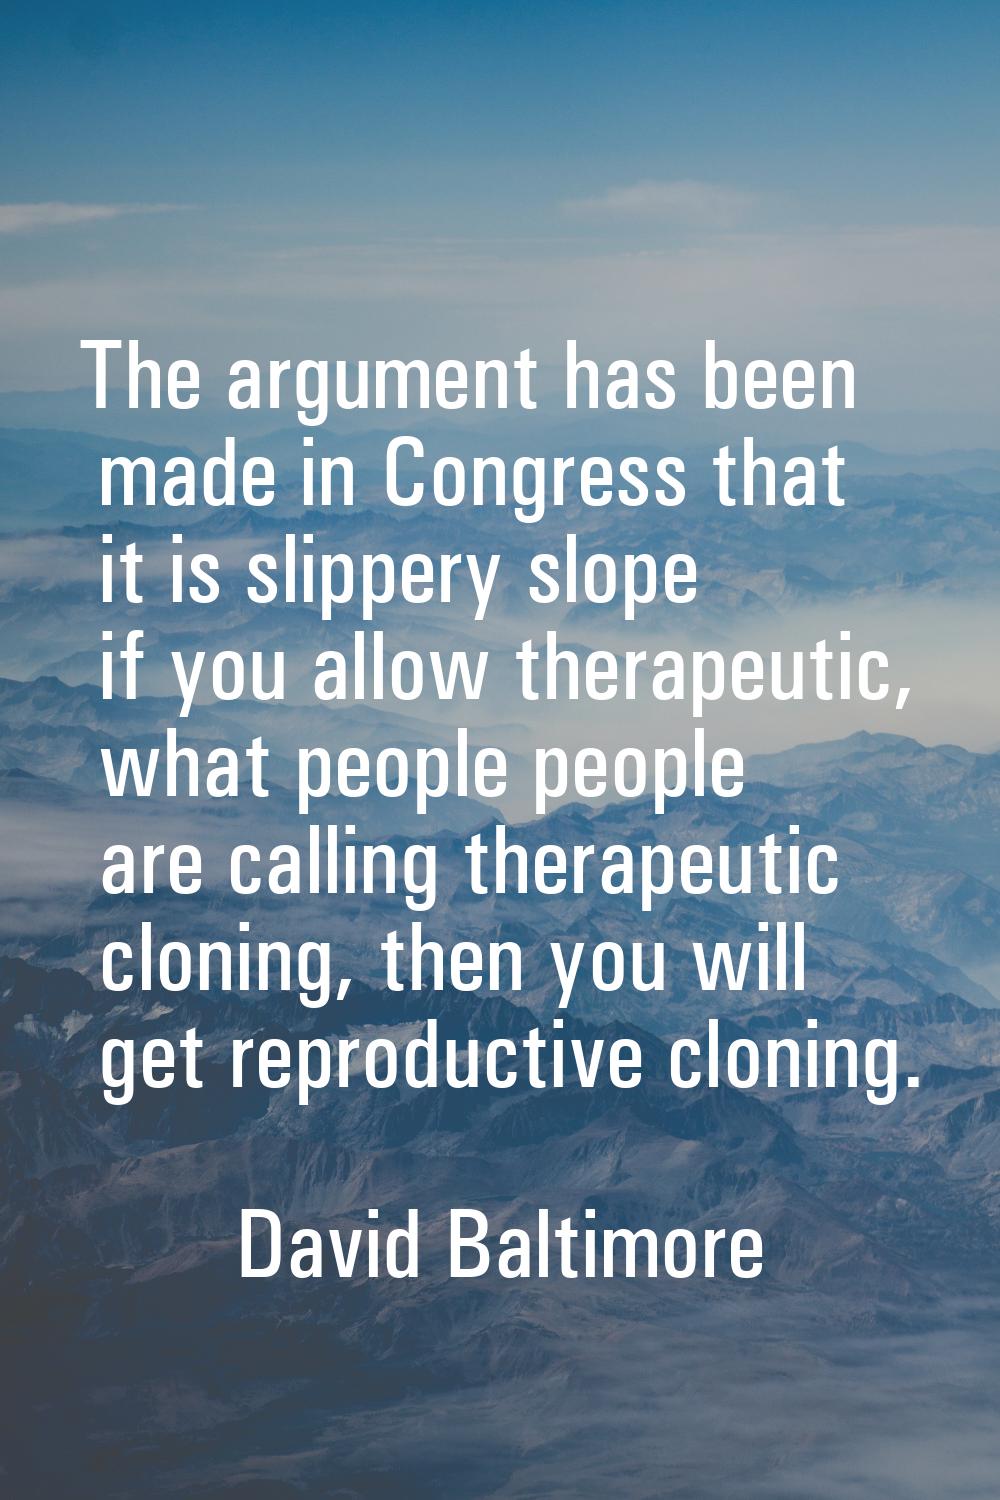 The argument has been made in Congress that it is slippery slope if you allow therapeutic, what peo